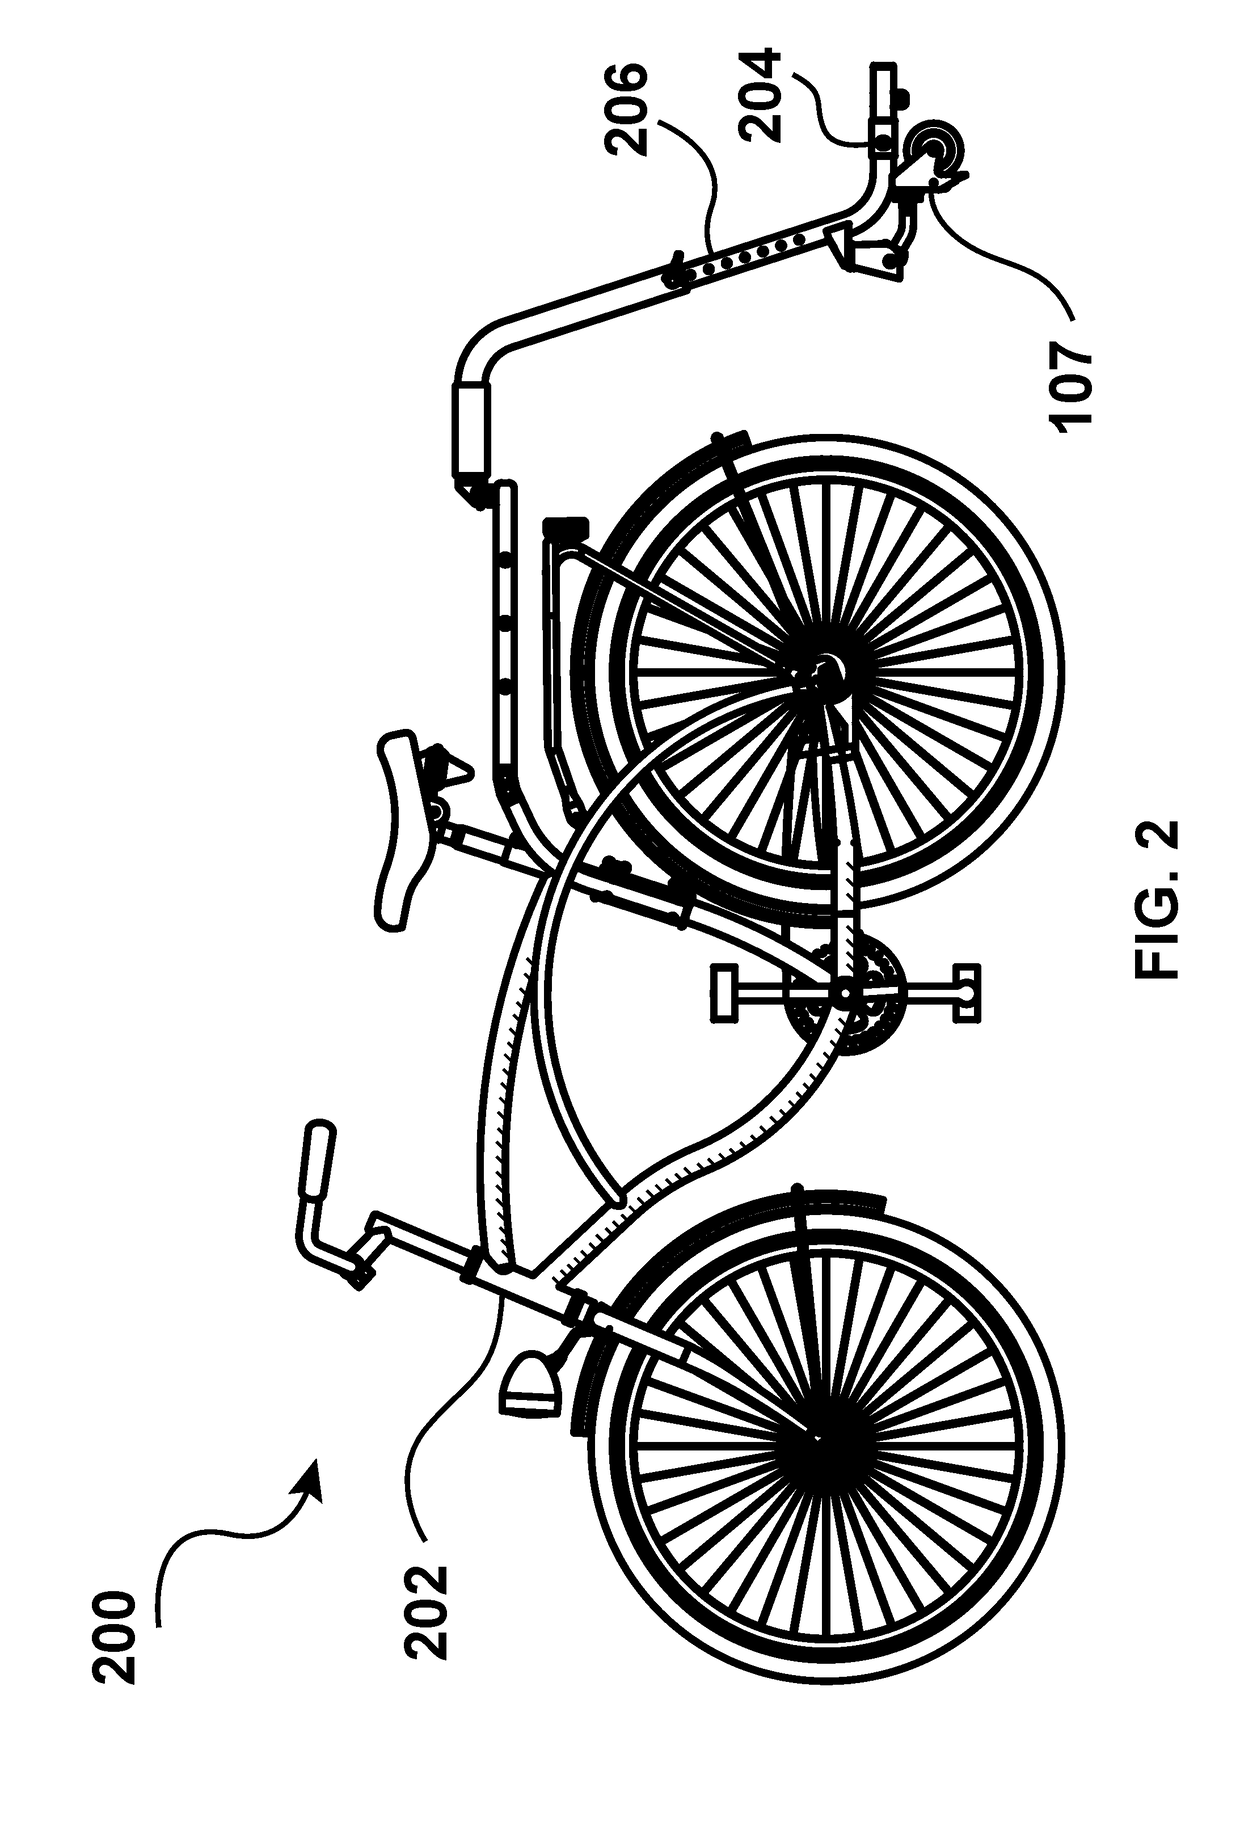 Apparatus to utilize a universal hitch to detachably attach a bicycle with a trailer to carry loads and convert the trailer into a cart when detached